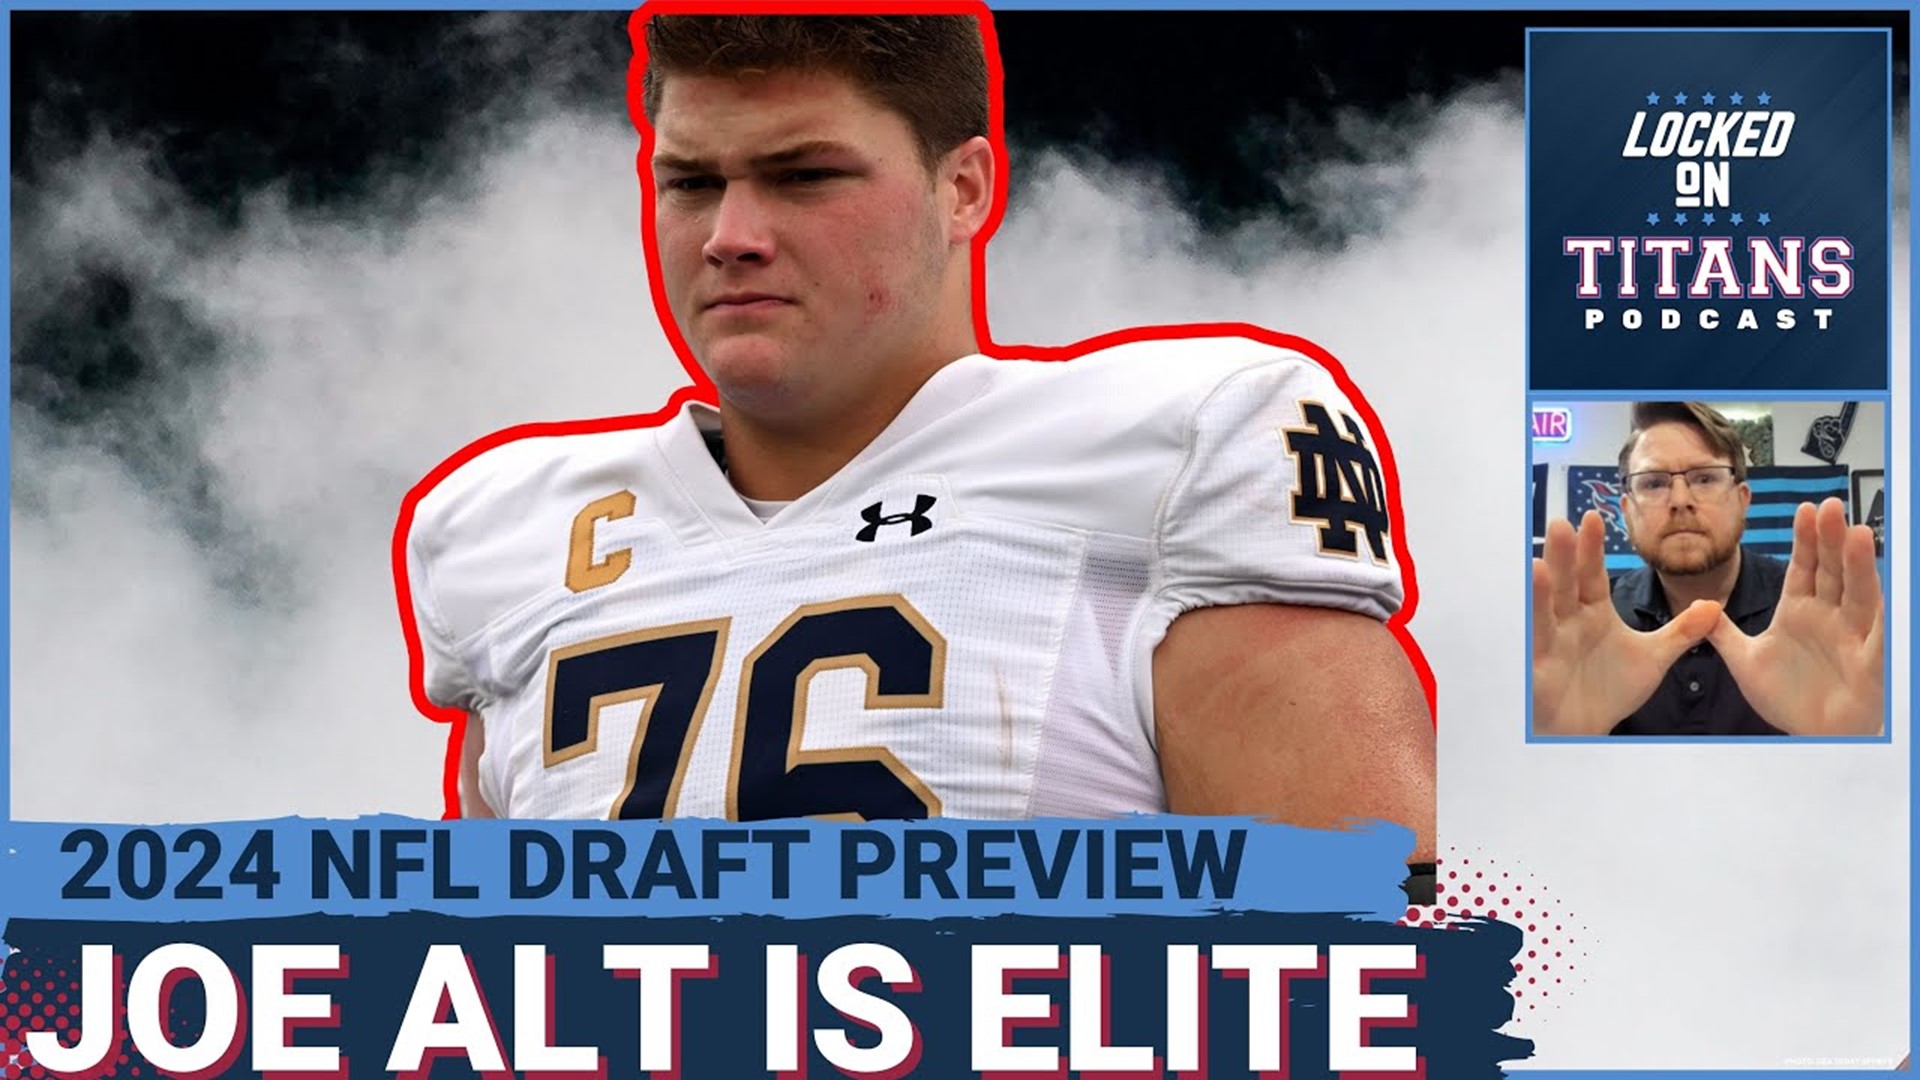 The Tennessee Titans must address offensive tackle multiple times in this year's NFL Draft and at the top of the list should be Joe Alt who is an elite tackle